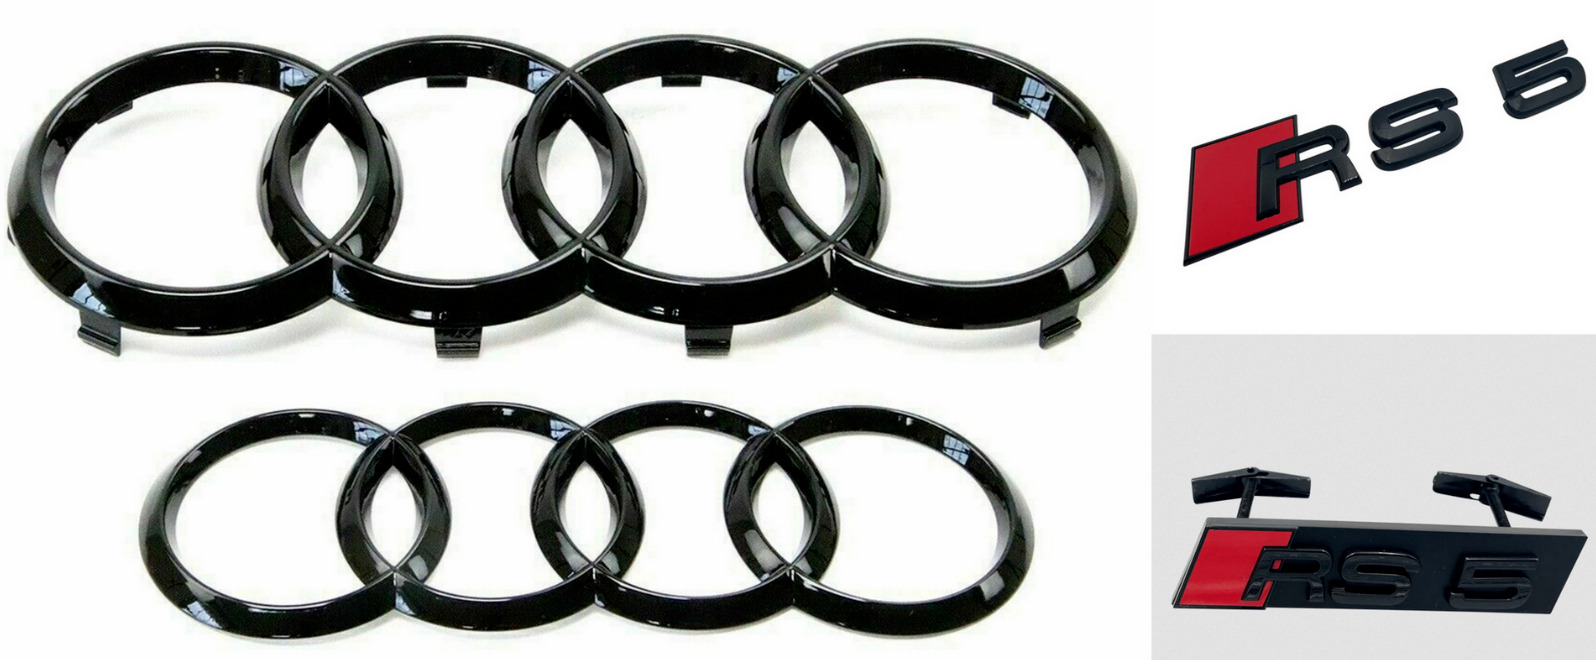 For Audi RS5 Car Front Rear Rings Hood Grille Emblem Trunk Decal Sticker Black